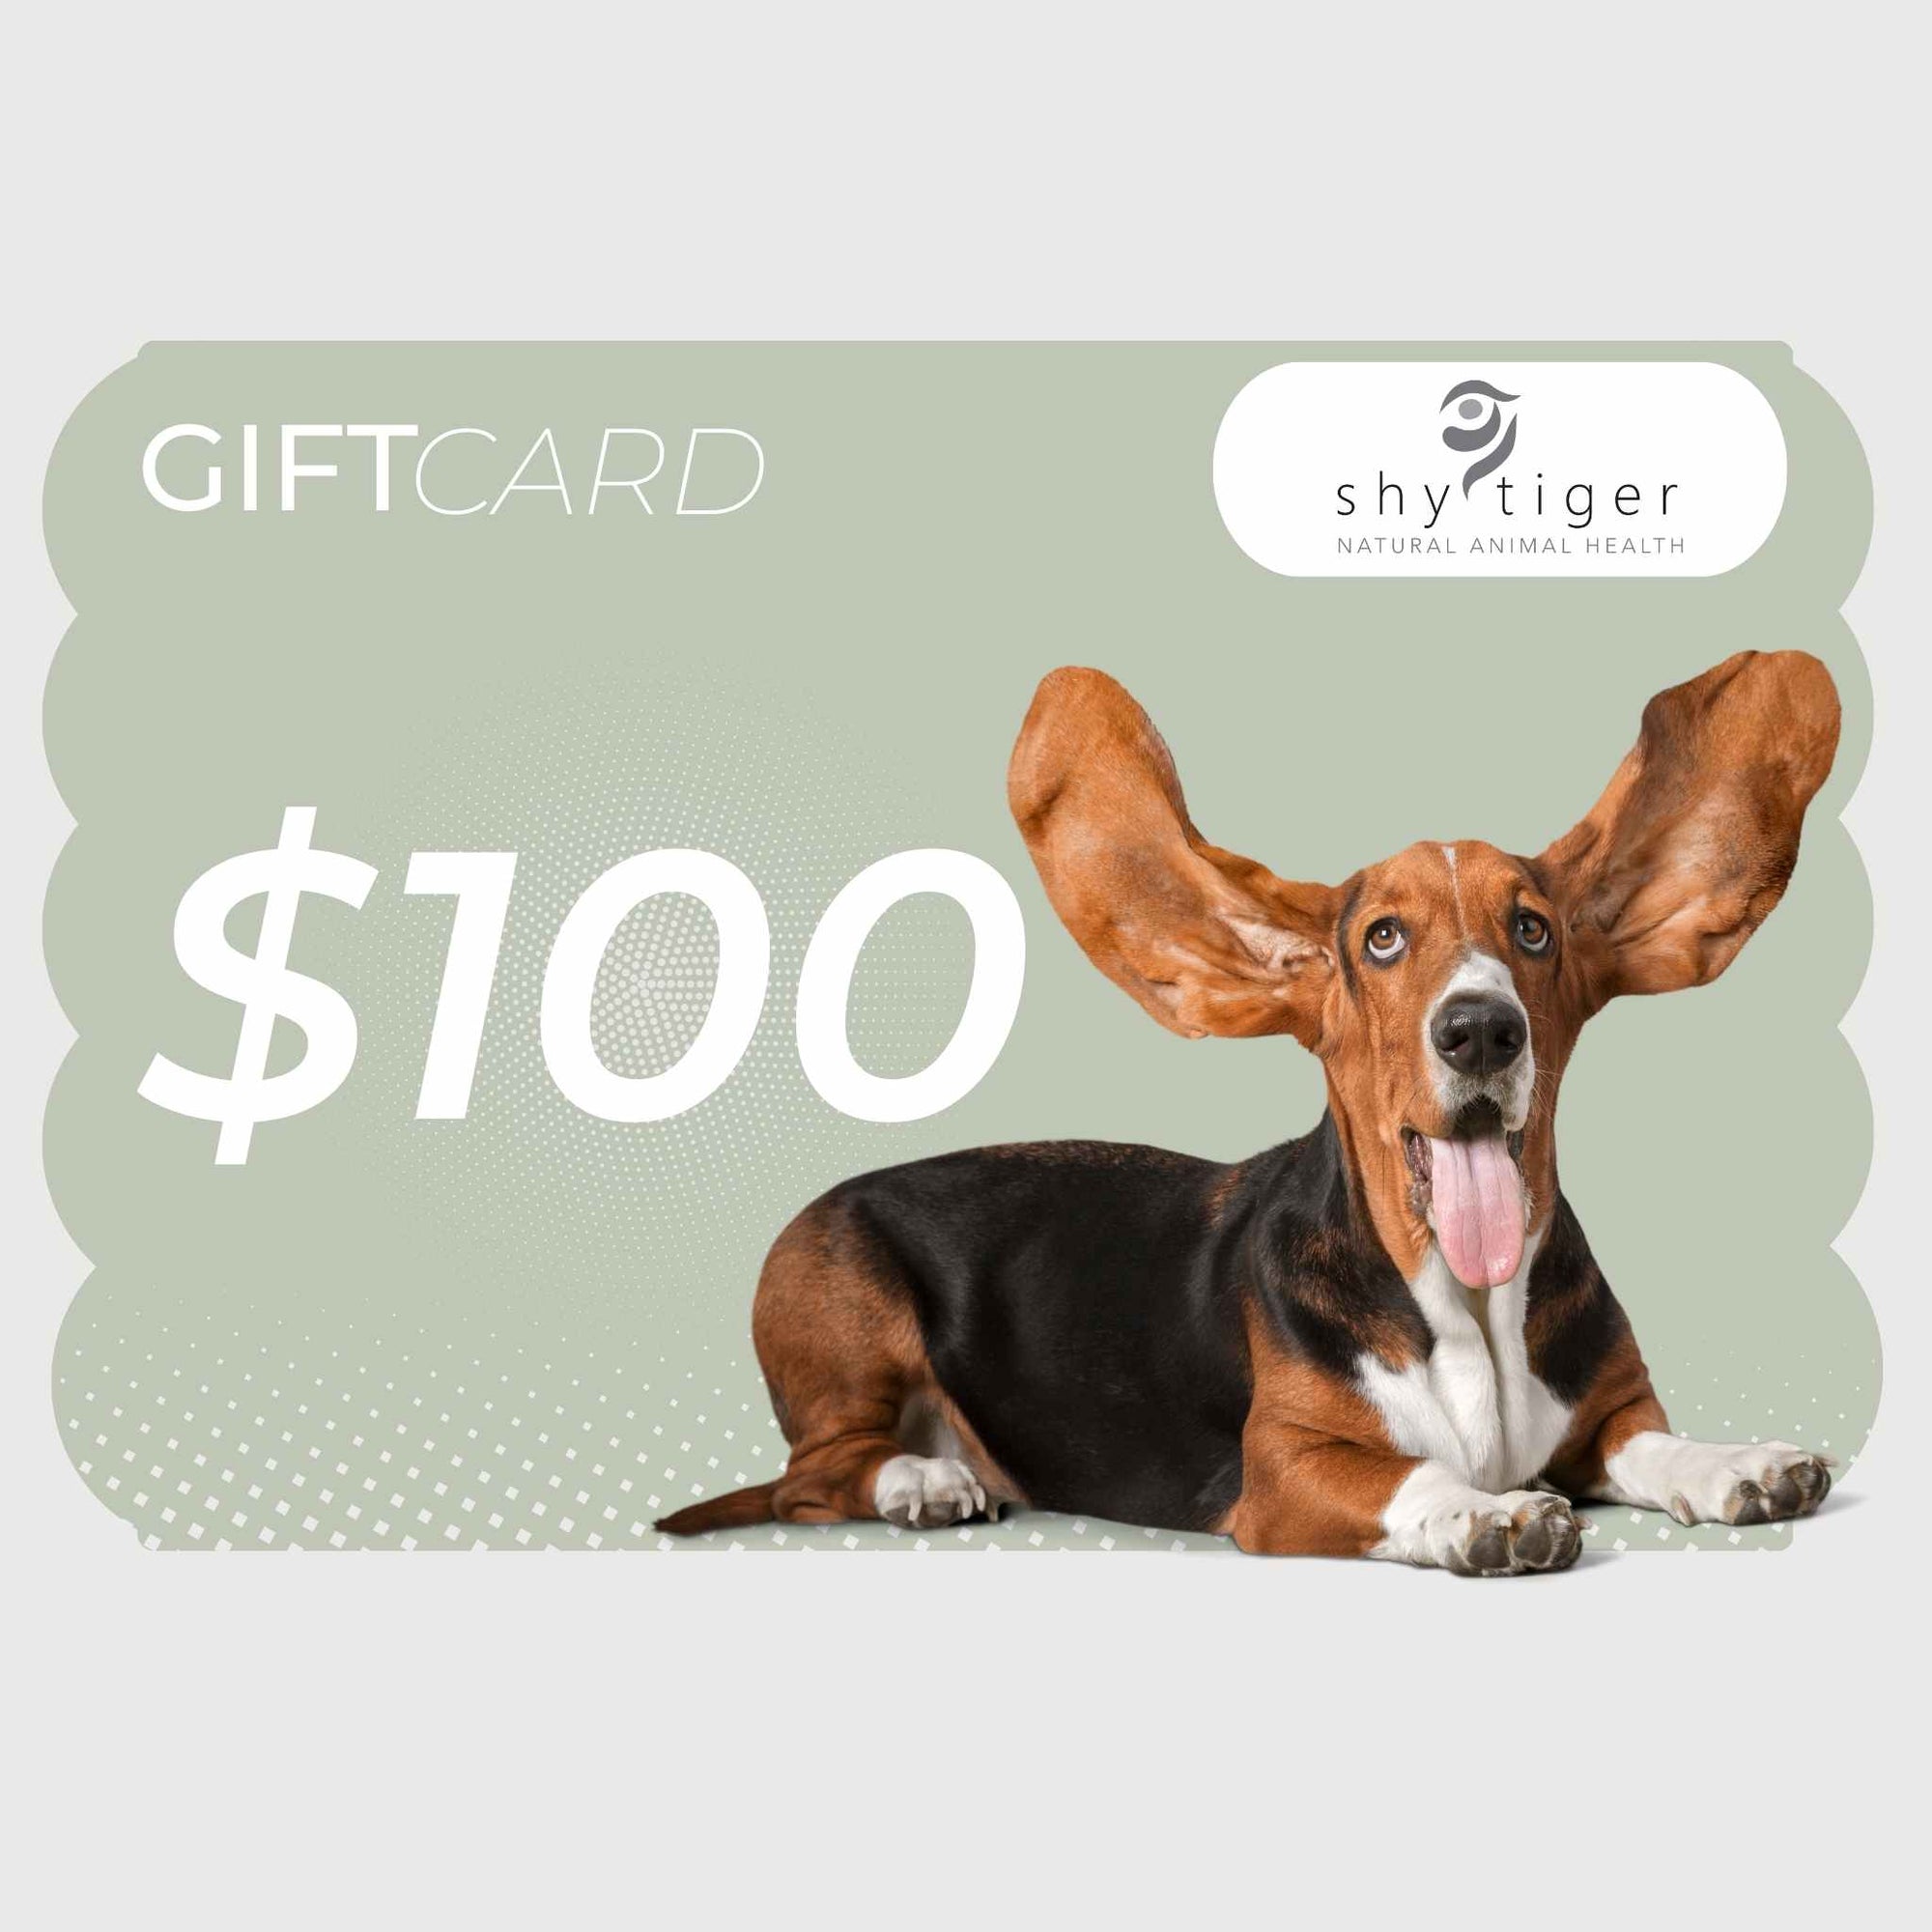 A very happy dog with large ears on a green background promoting a $100 gift card. 